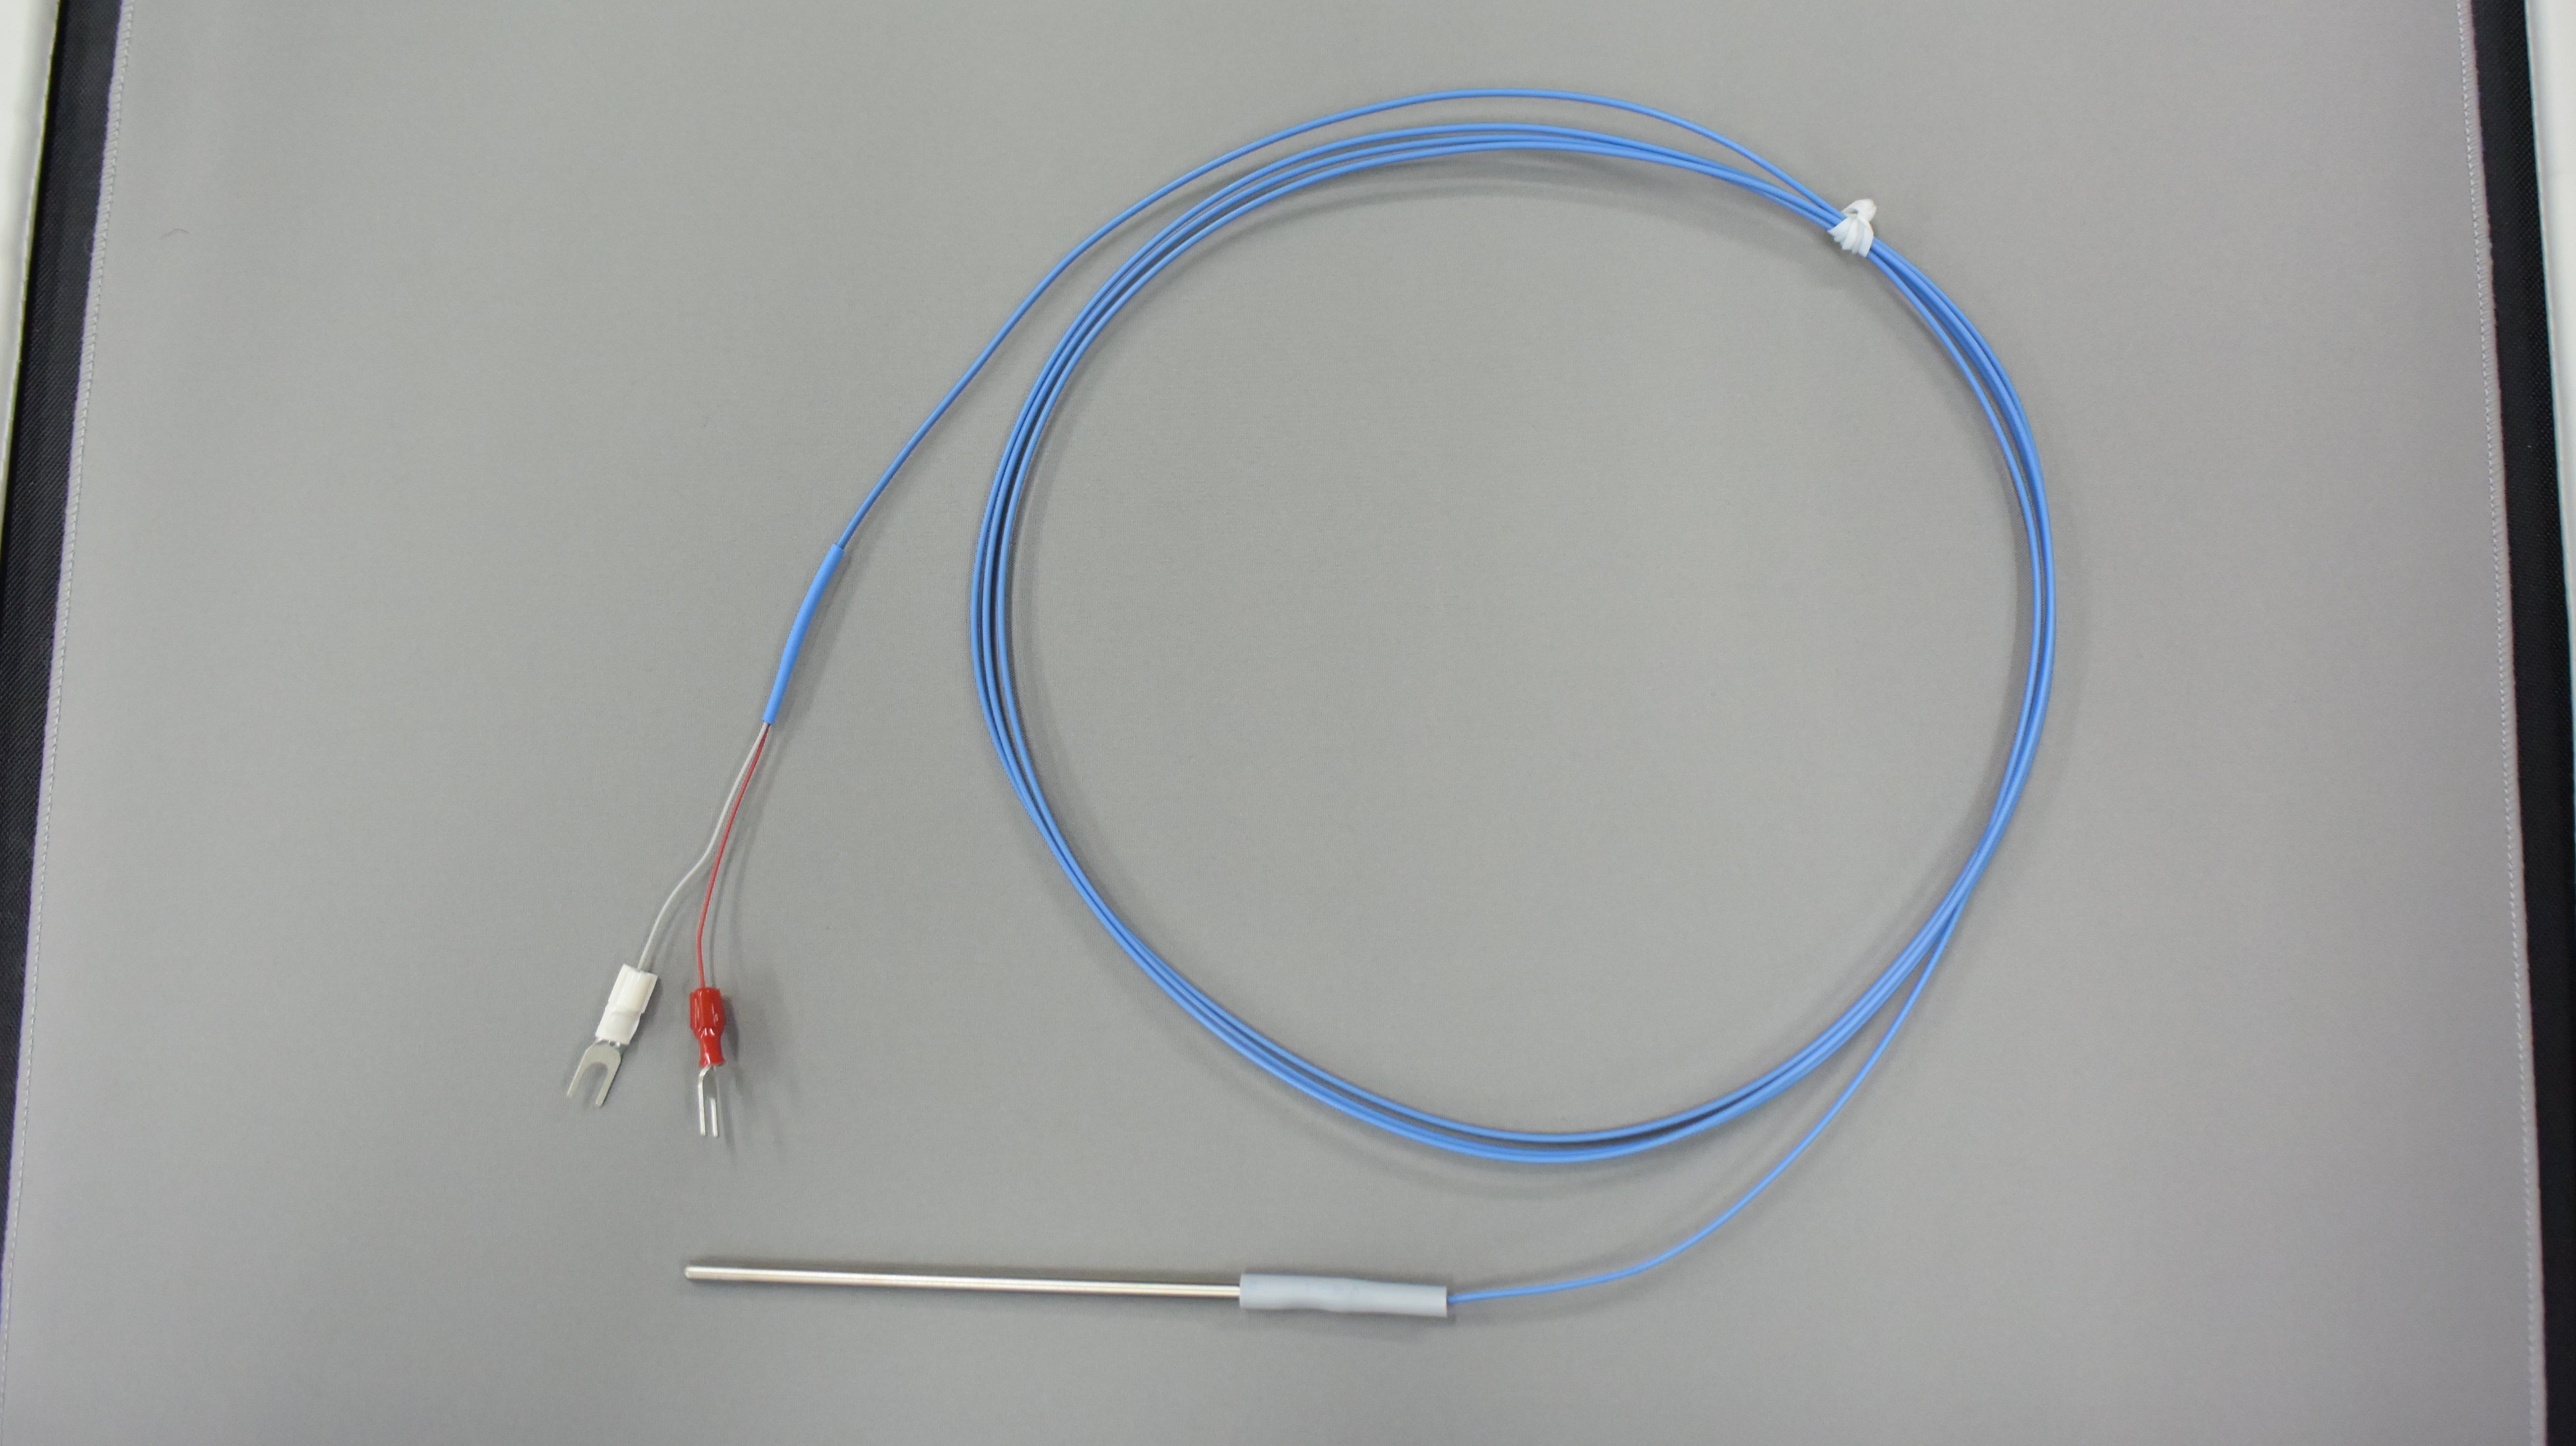 Thermocouple (Type K) "Sheathed Type" (fluororesin coated) Max. operating temp: 260°C, Tolerance: Class 1 (±1.5°C or ±0.4%), waterproof (IP67)